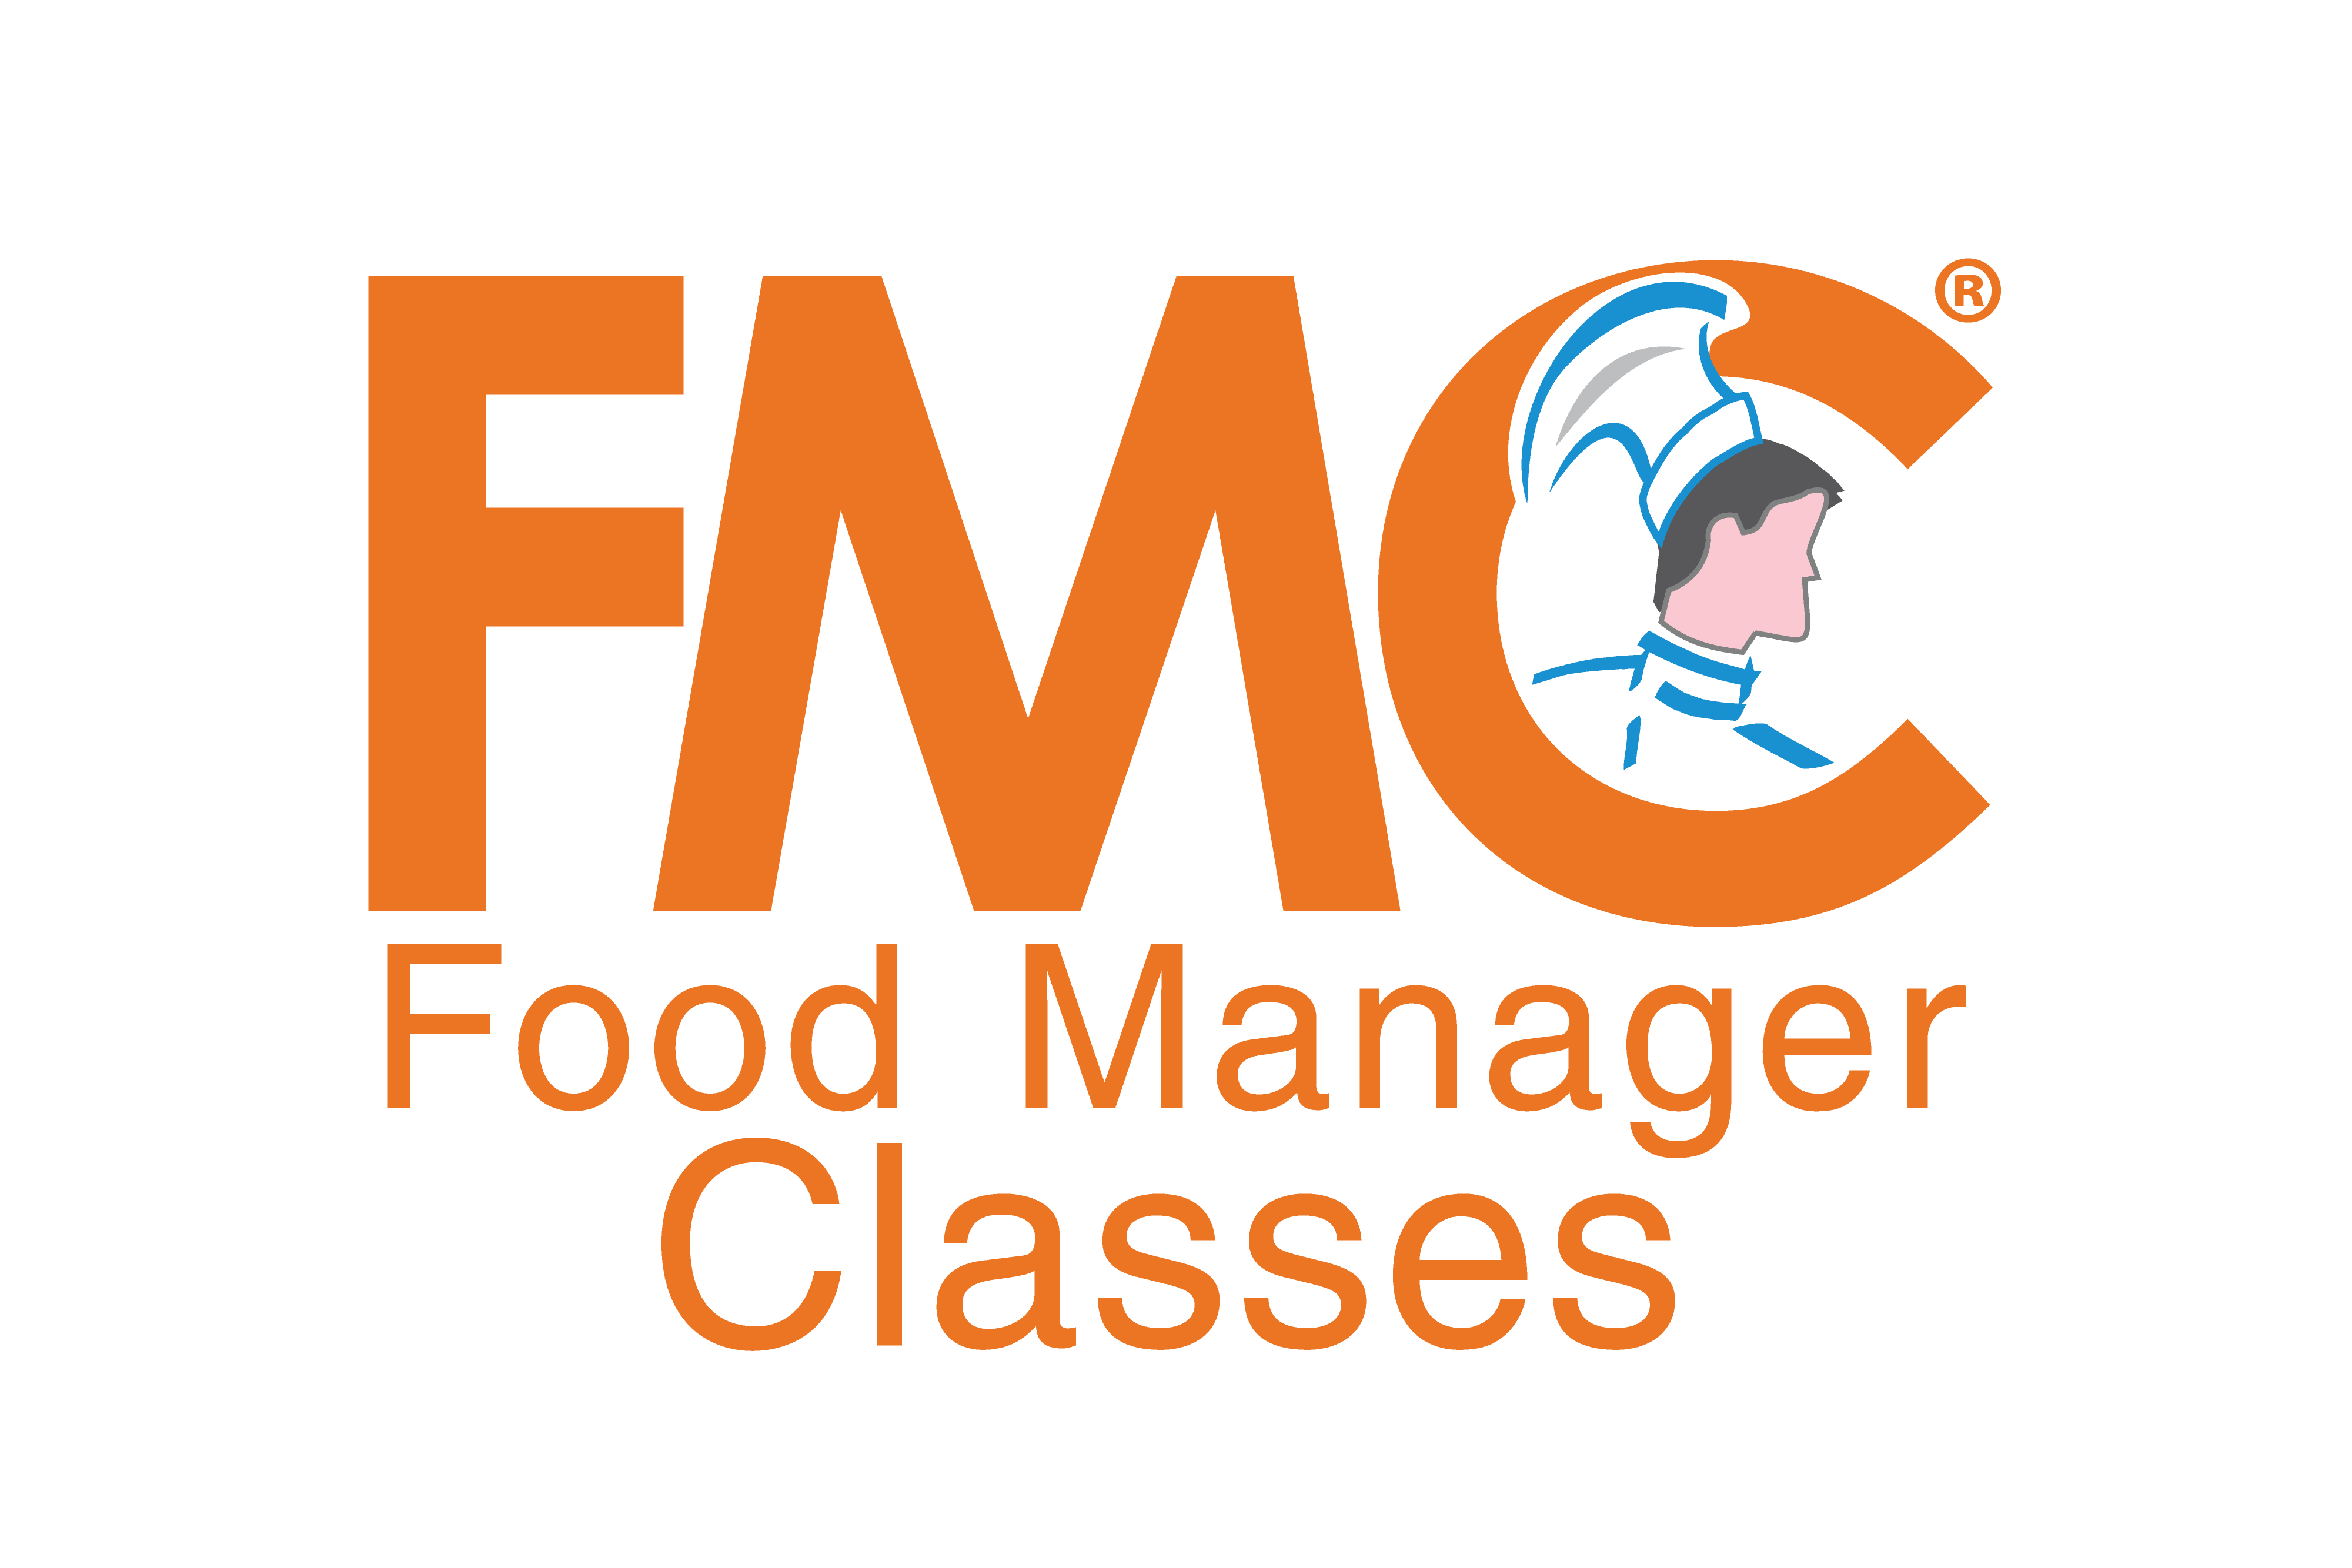 Food Manager Classes